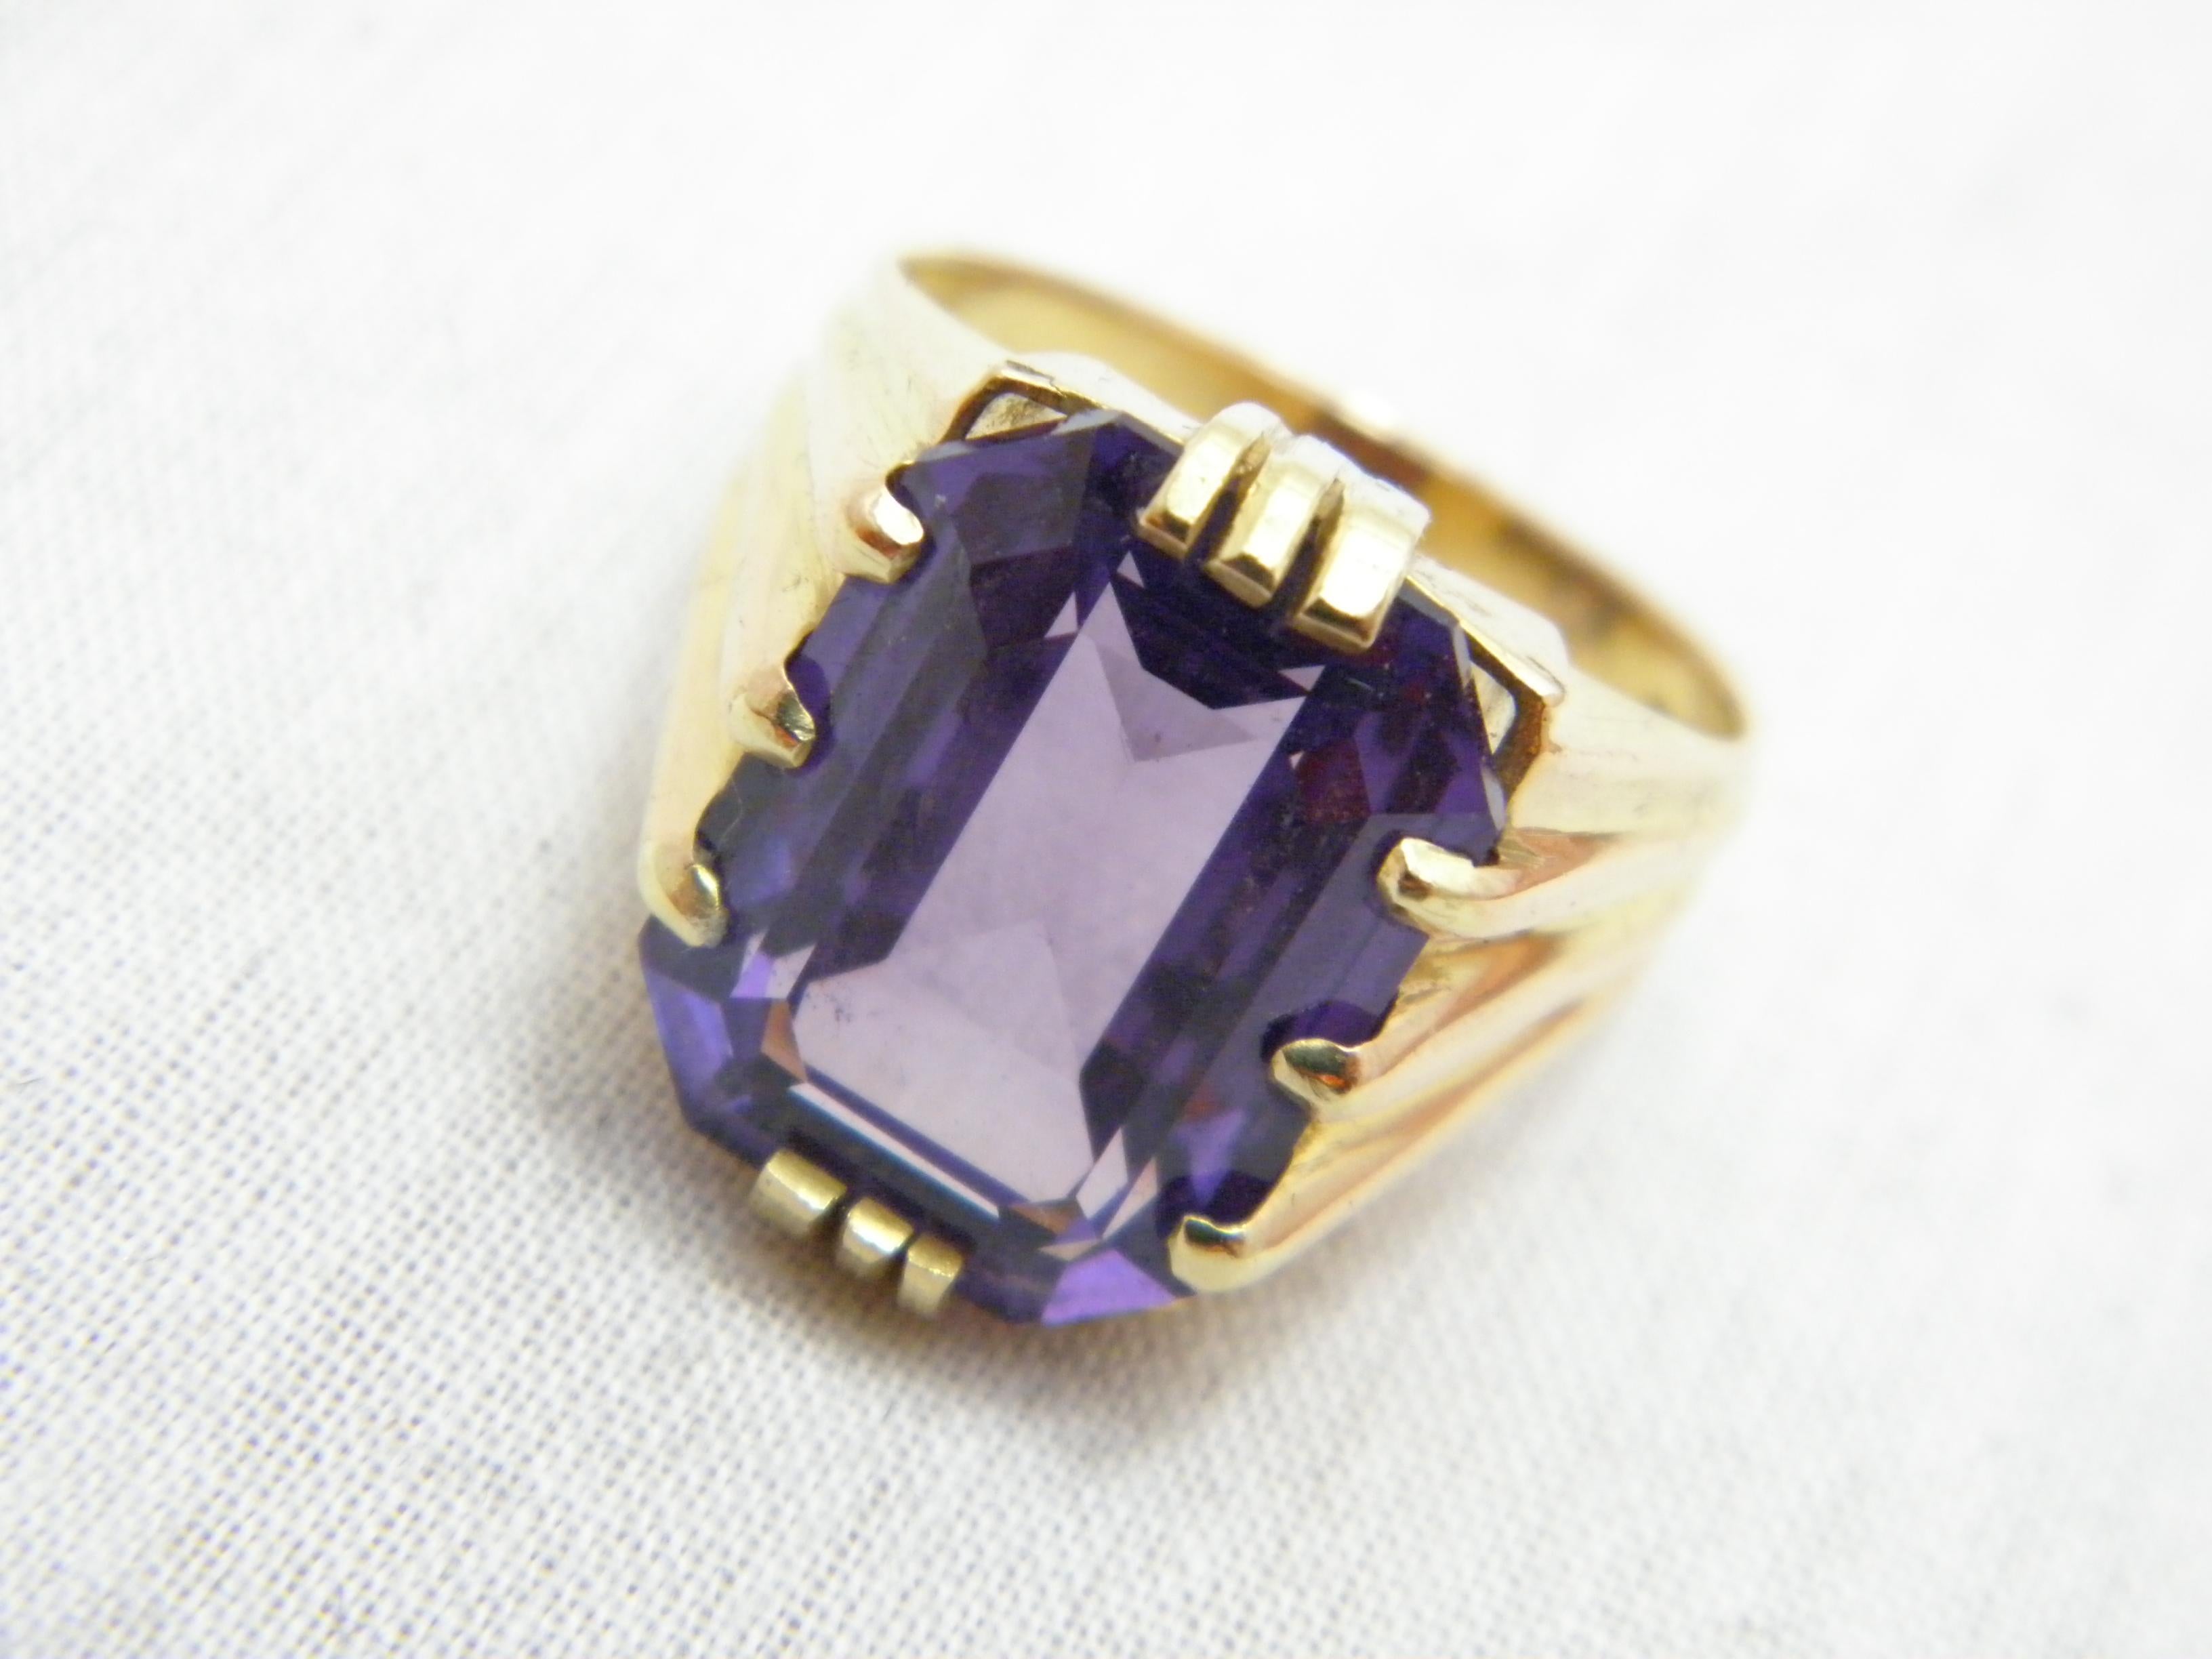 For your consideration I have this amazing:

18CT GOLD ALEXANDRITE CORUNDUM HUGE SOLITAIRE STATEMENT SIGNET RING

DETAILS
Material: 18ct 750/000 Yellow Gold - VERY heavy
This ring has a very thick and sturdy shank hence ideal if resizing